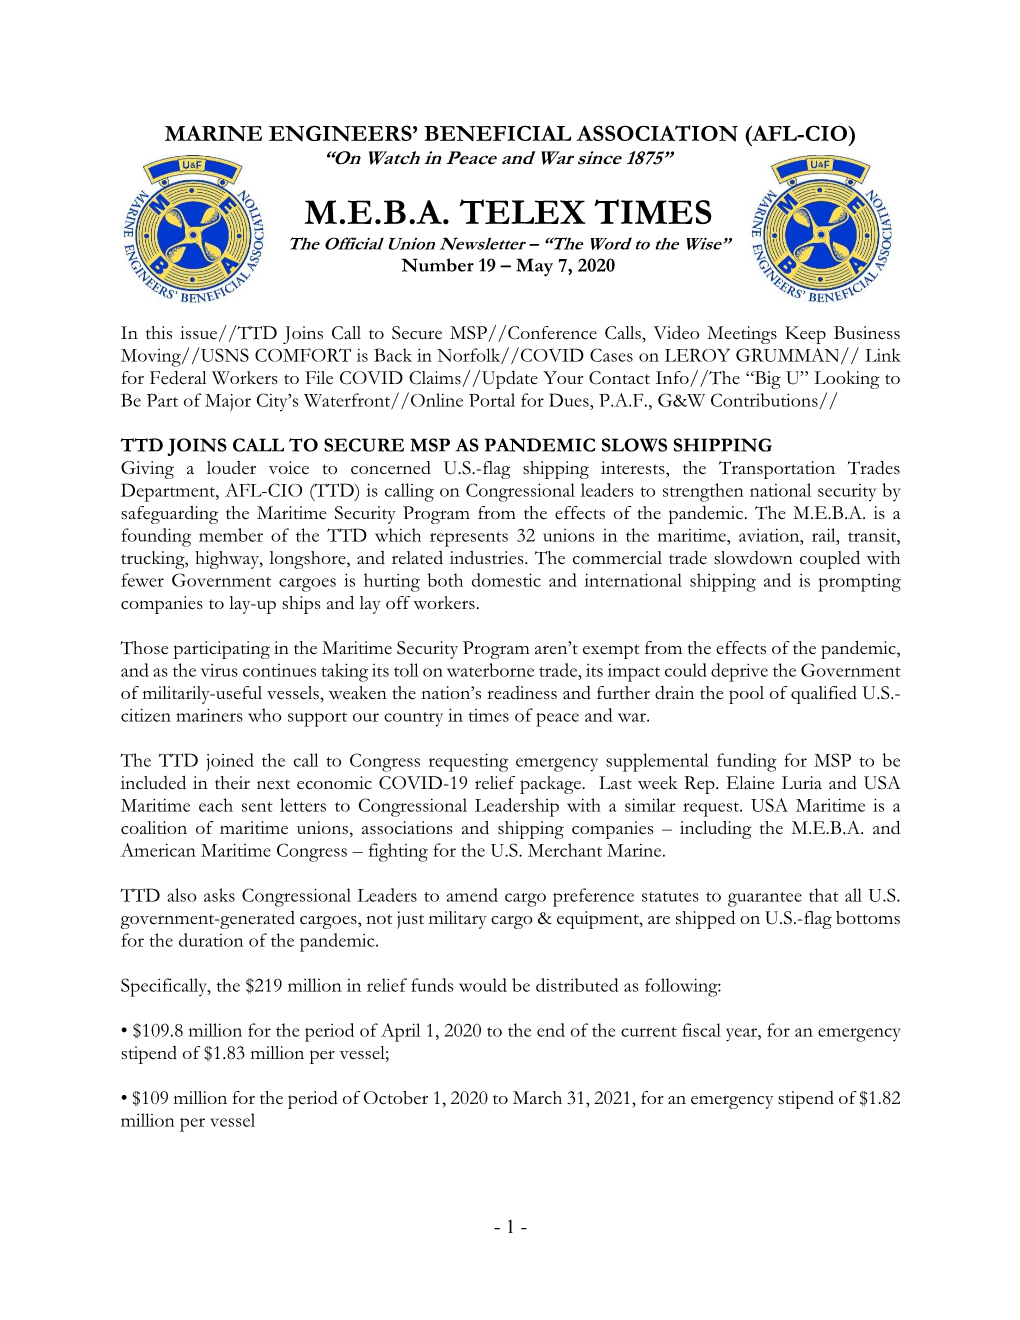 M.E.B.A. TELEX TIMES the Official Union Newsletter – “The Word to the Wise” Number 19 – May 7, 2020